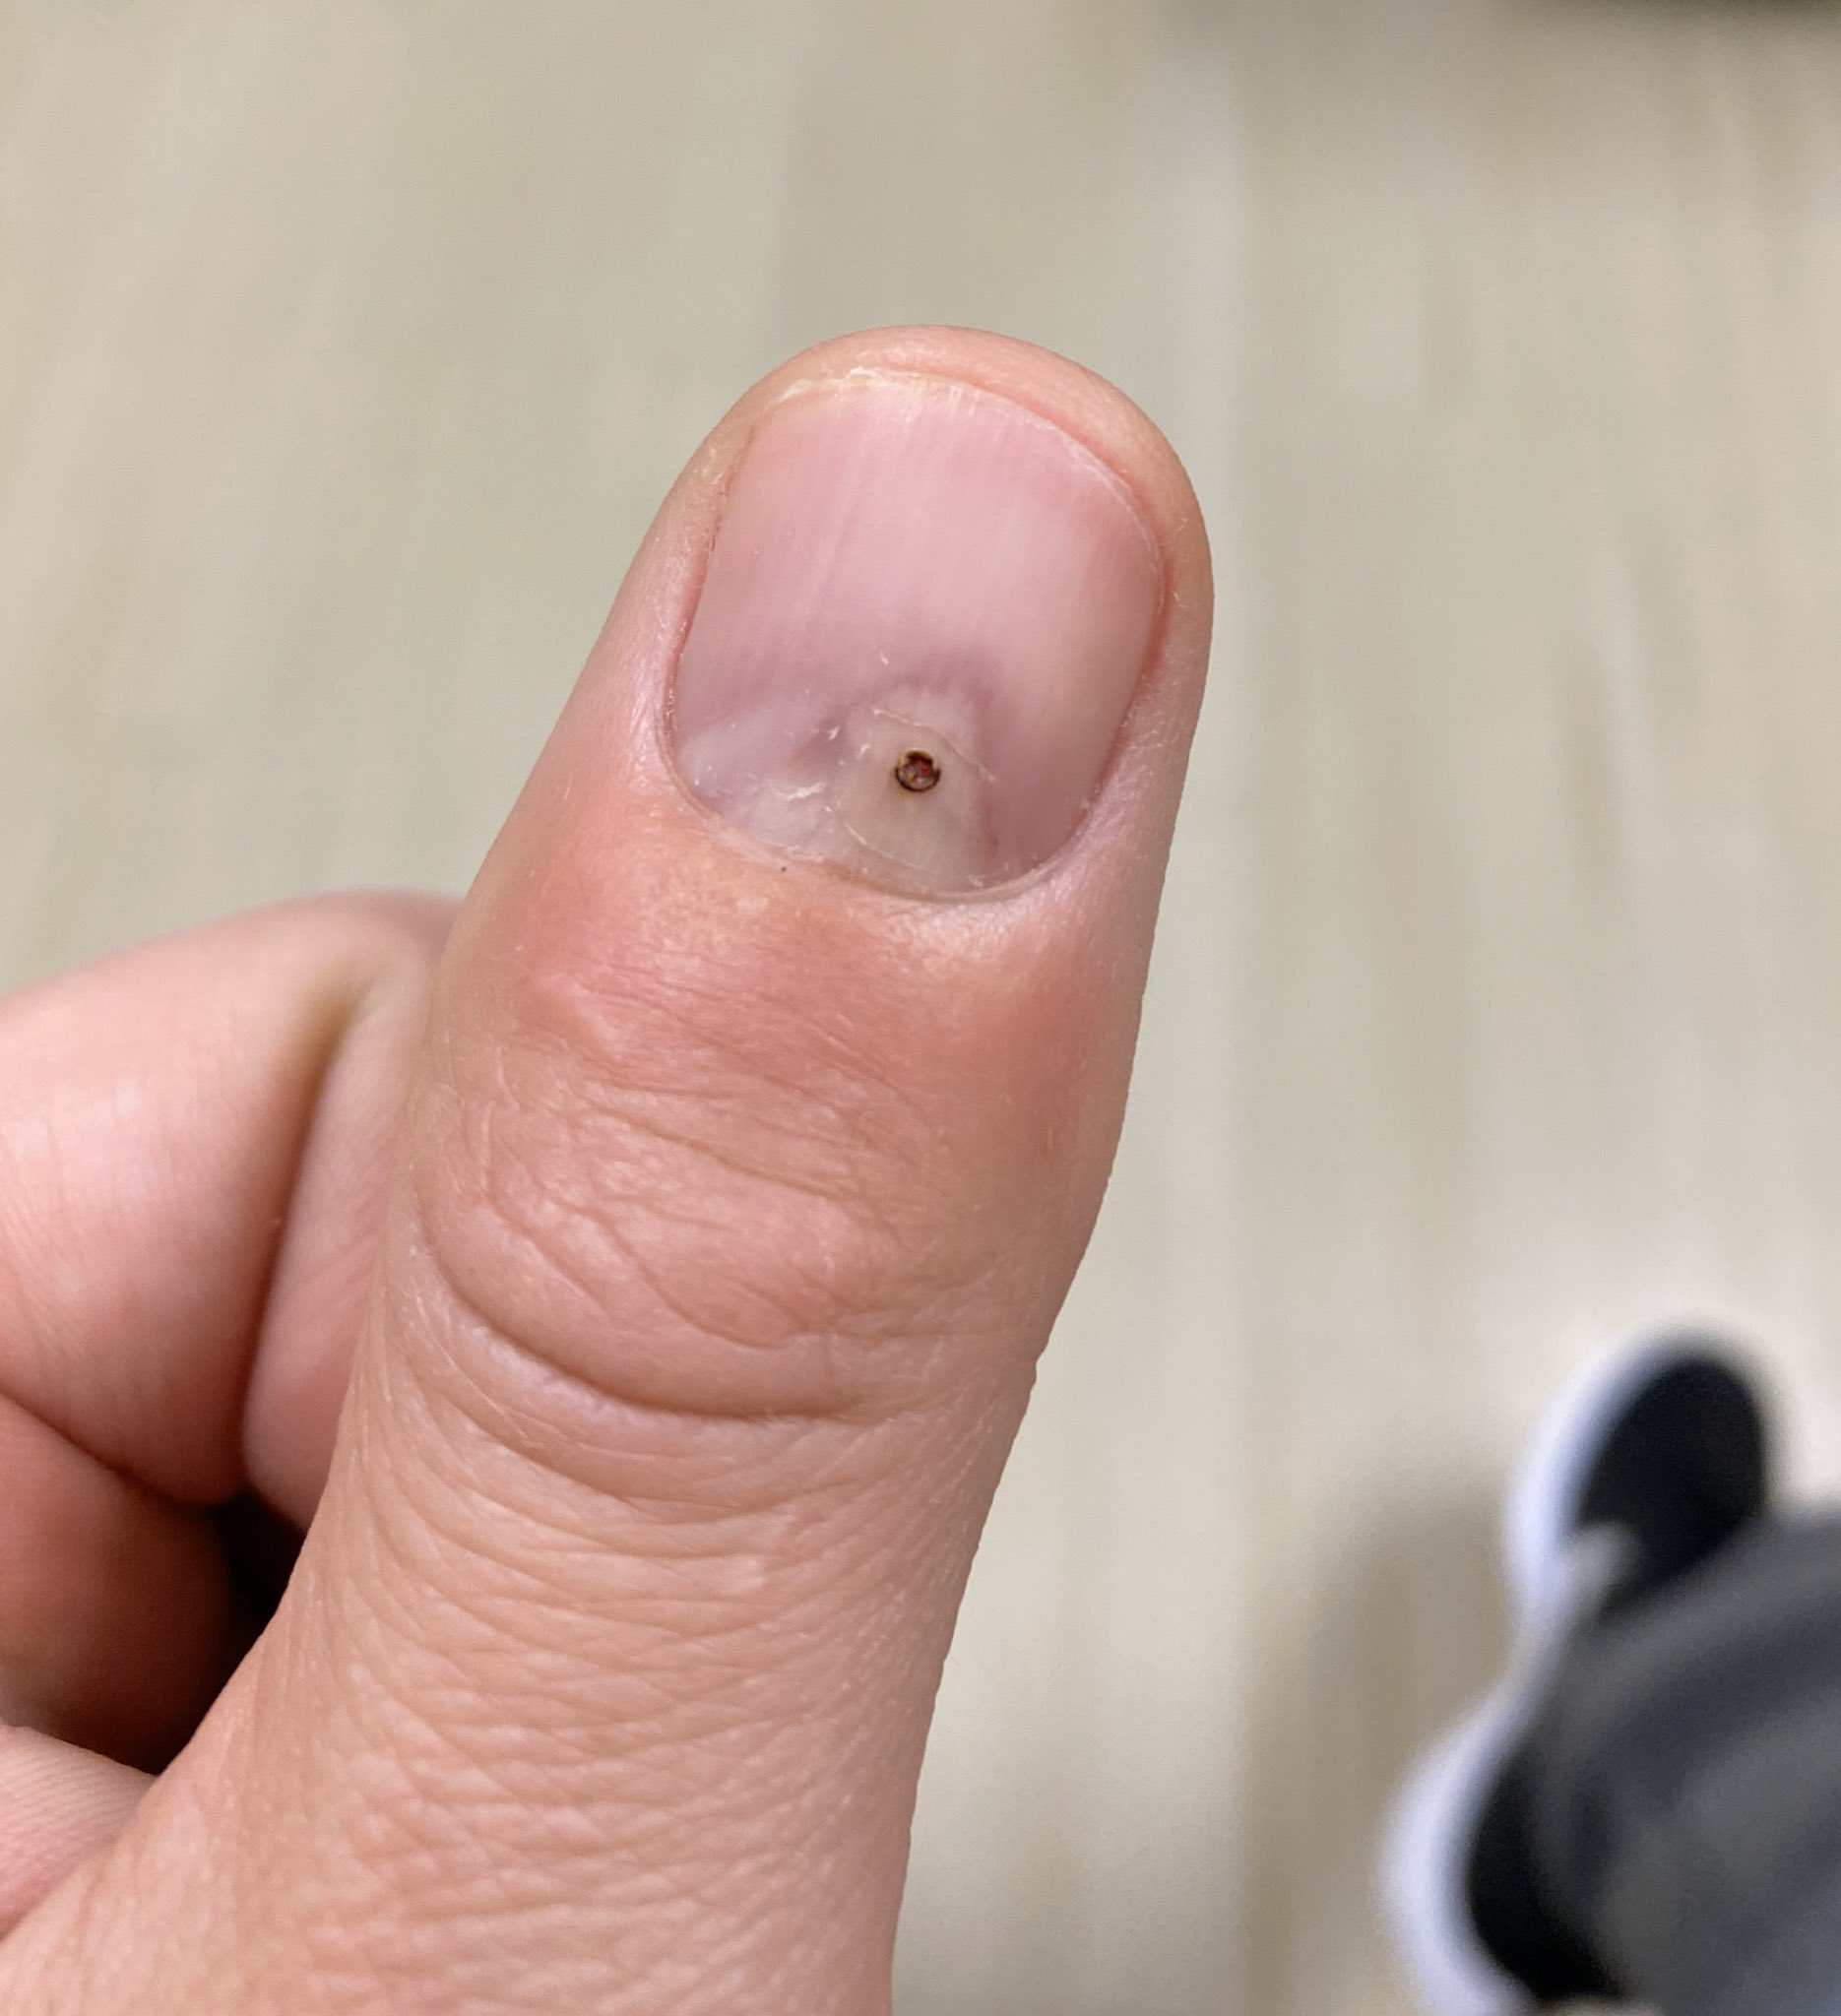 Find a tick lodged in your skin? Here is what you should do | Daily Sabah